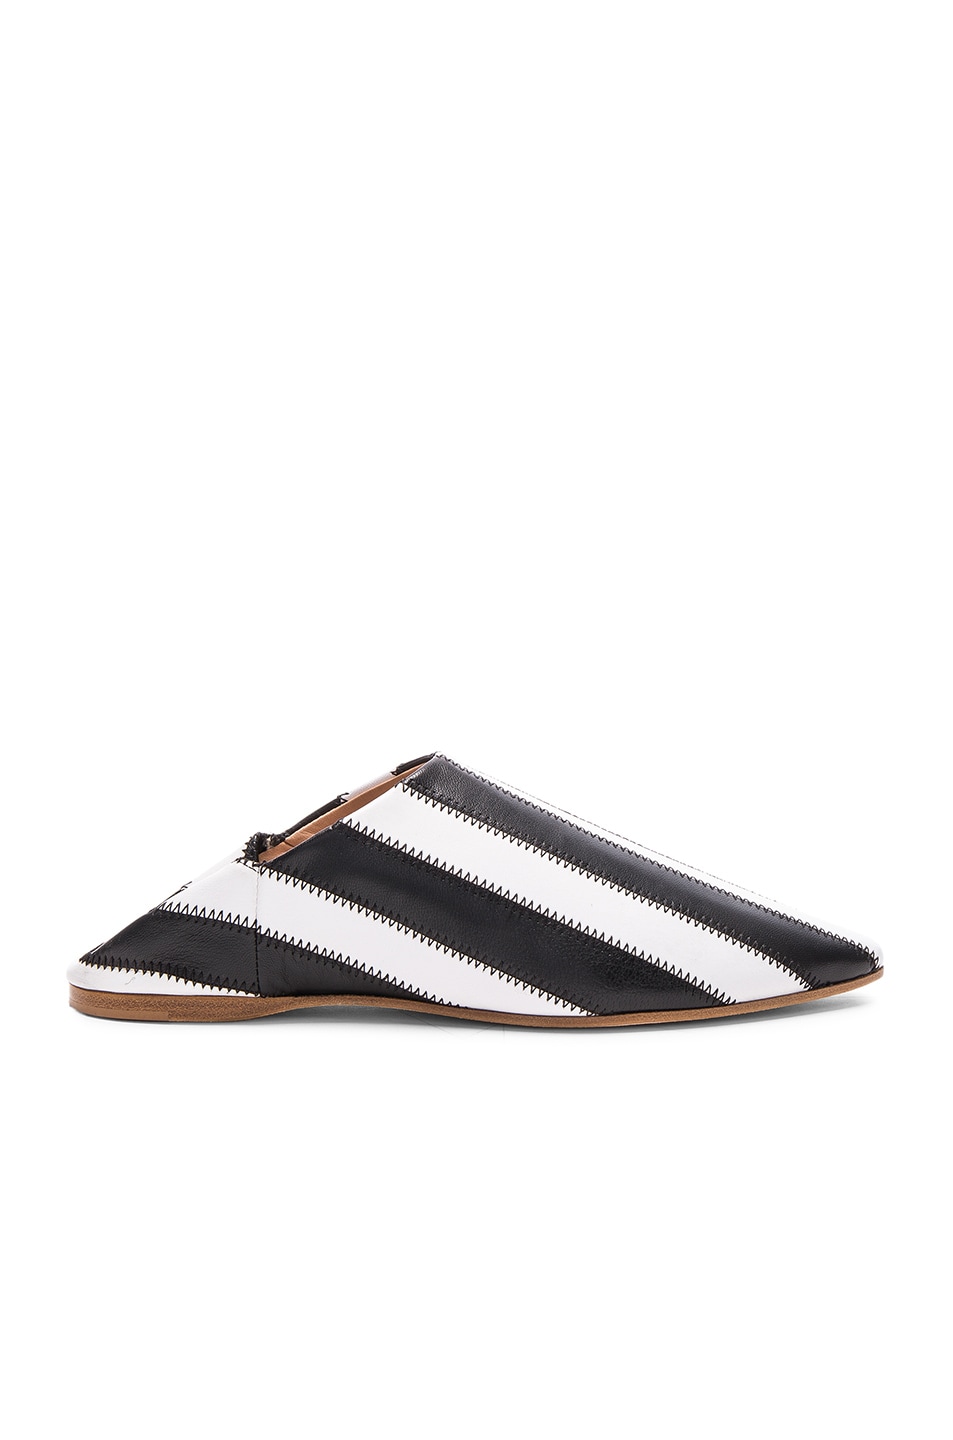 Image 1 of Acne Studios Leather Amina Patch Babouche Slippers in Black & White